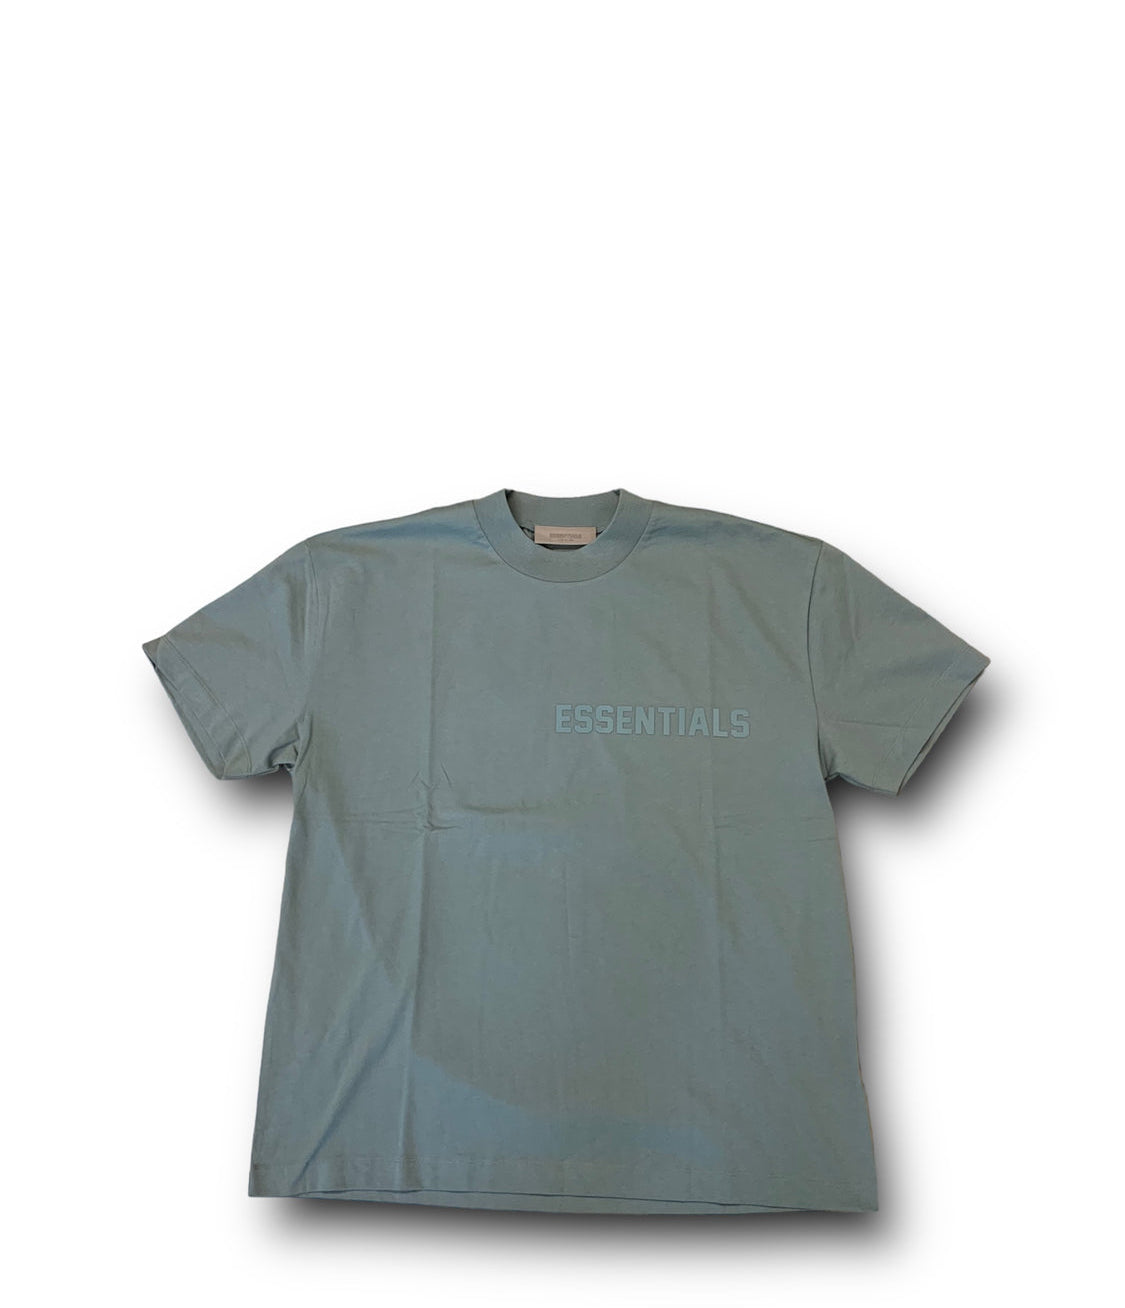 Essentials Fear of God Tee "Sycamore"